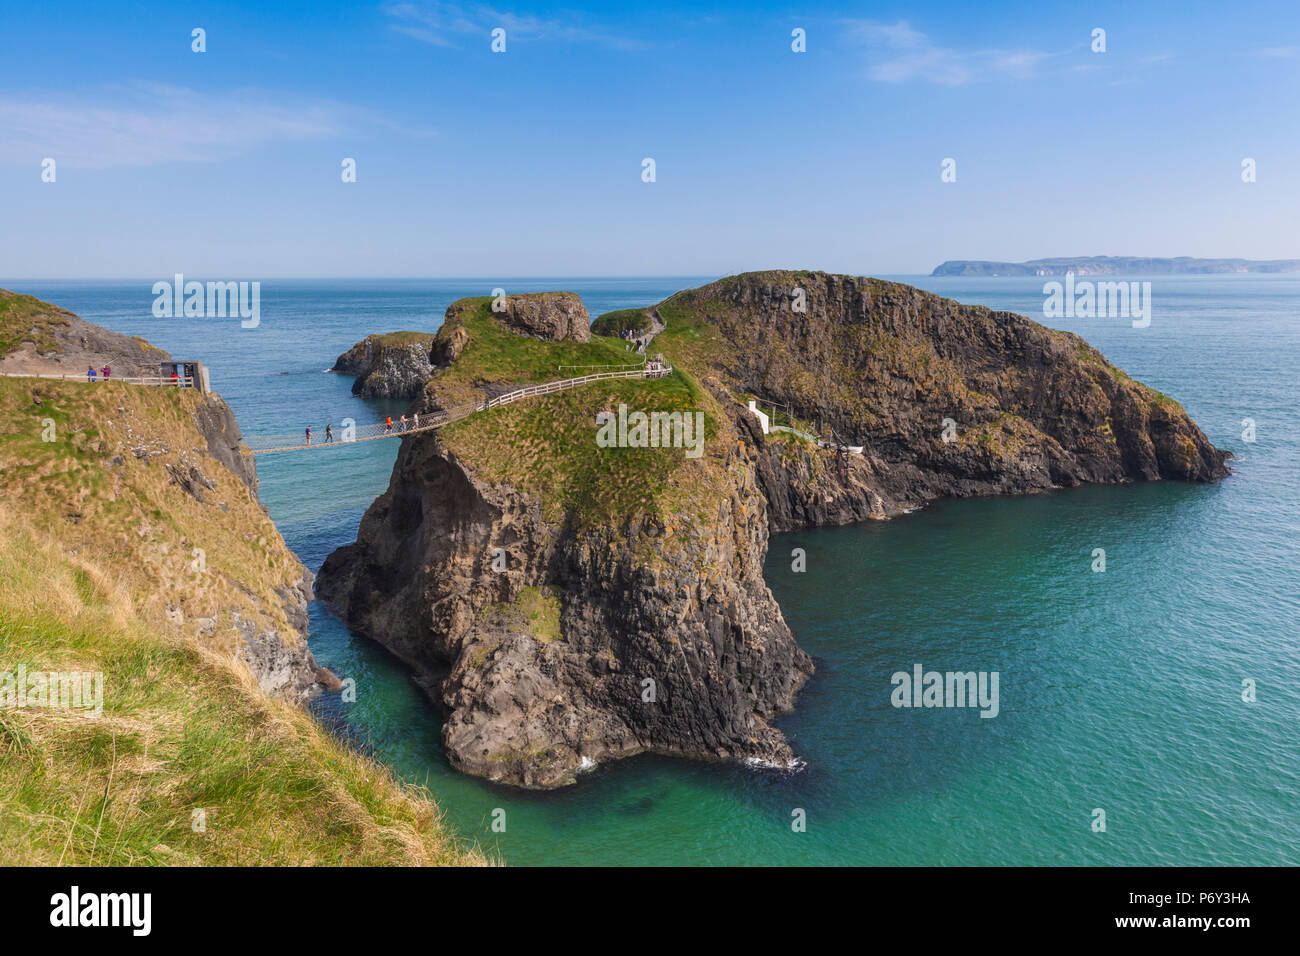 UK, Northern Ireland, County Antrim, Ballintoy, Carrick-a-Rede Rope Bridge, elevated view Stock Photo